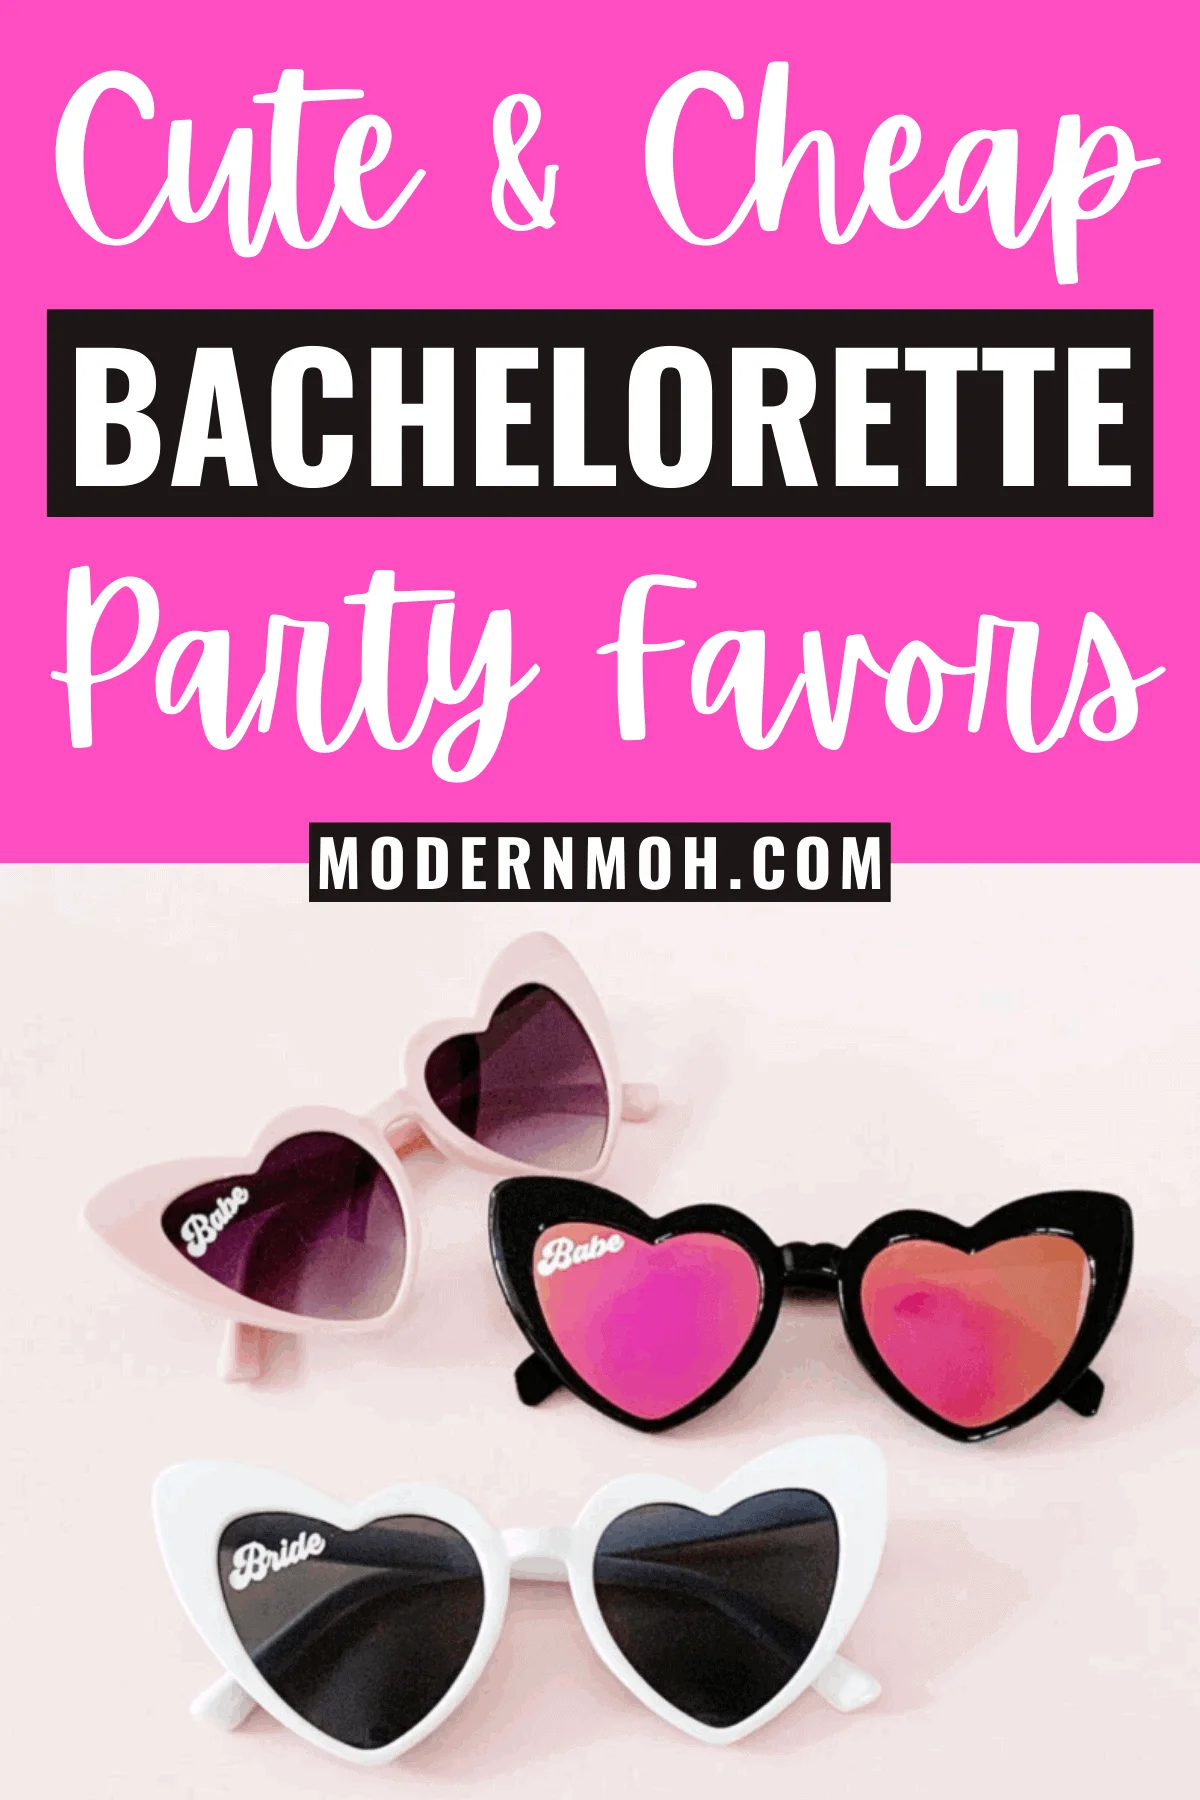 10 Bachelorette Party Favors for Your Girls Weekend